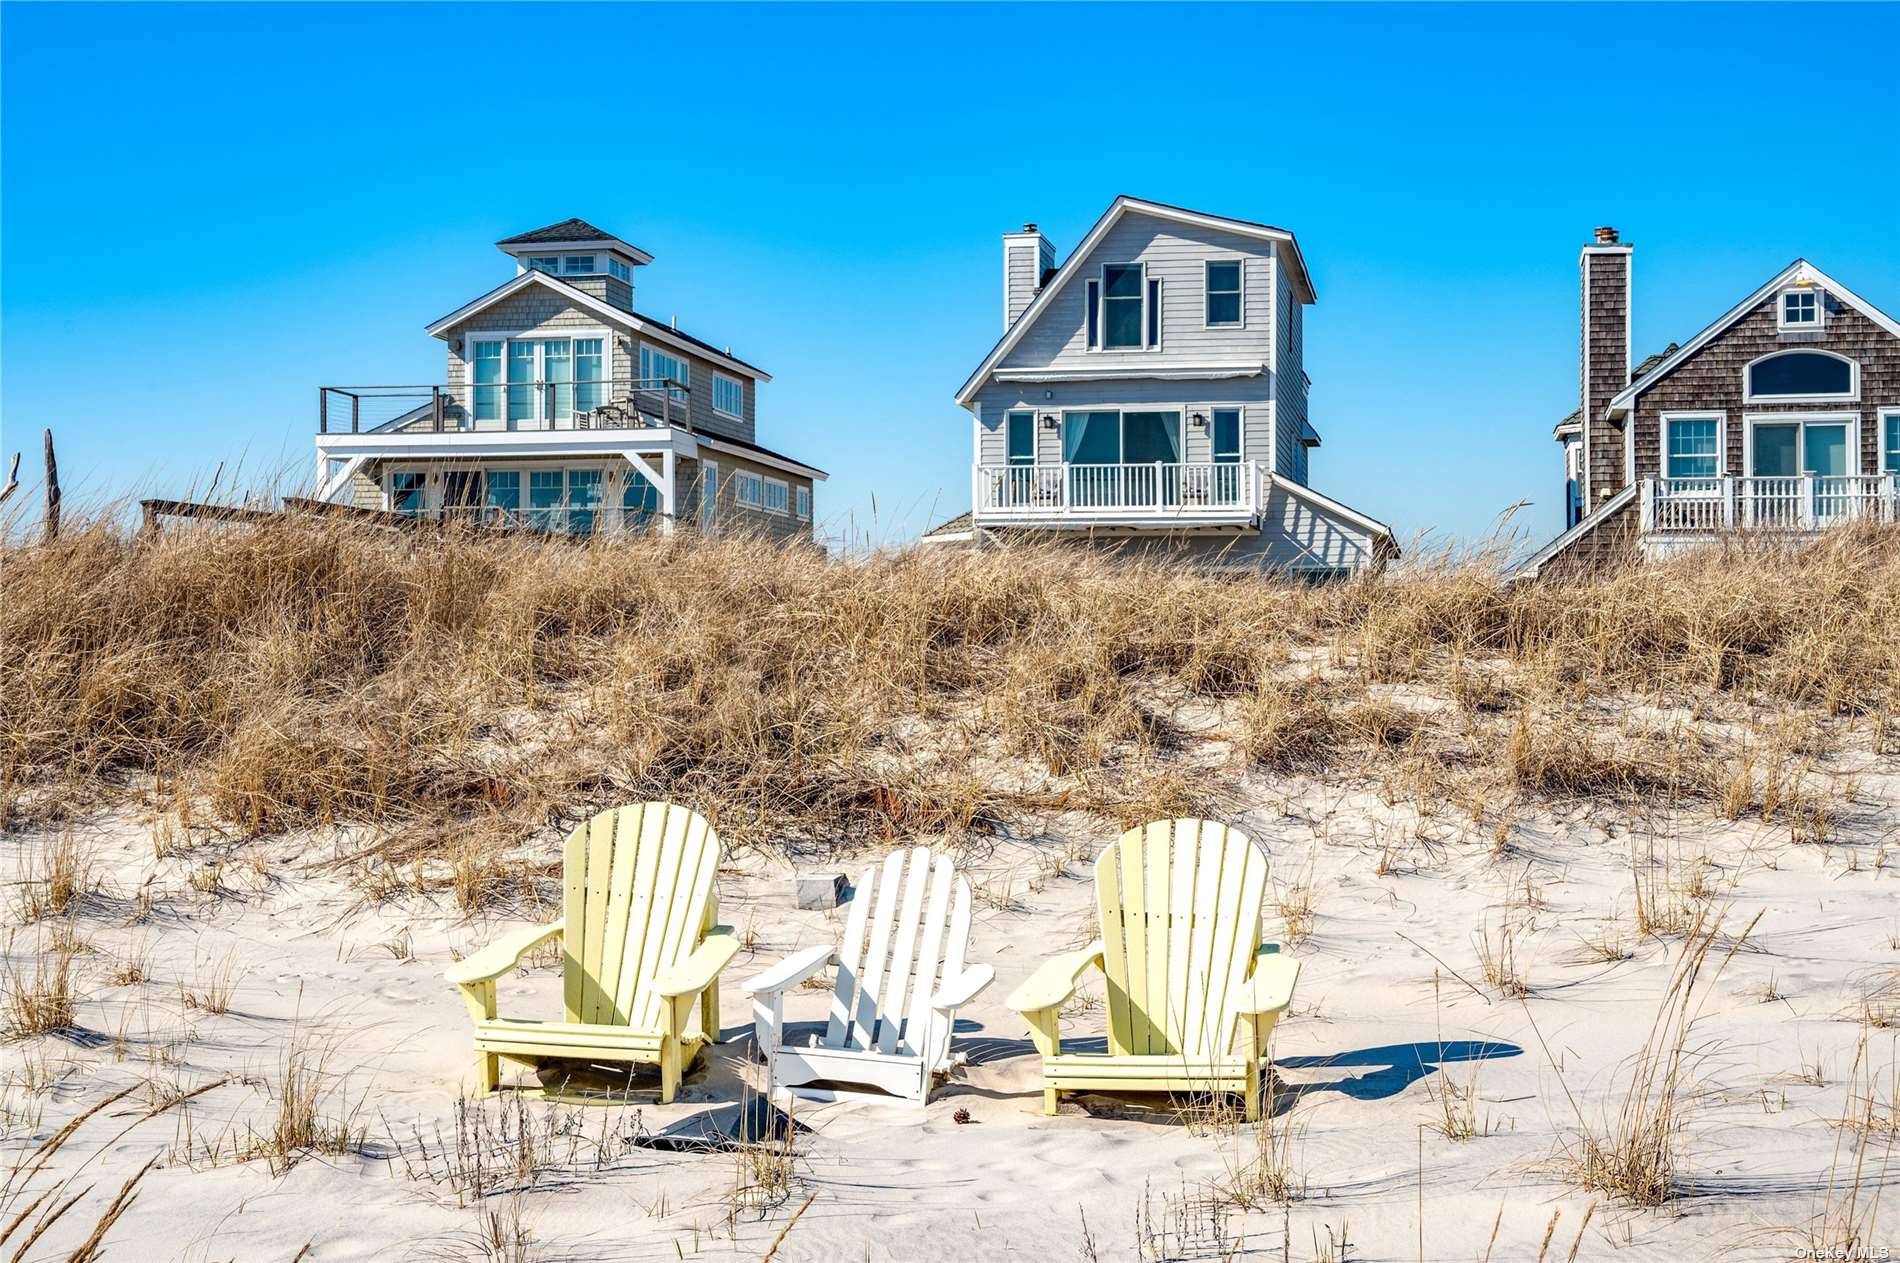 OCEANFRONT LIVING, This home offers 4 bedrooms and 4.